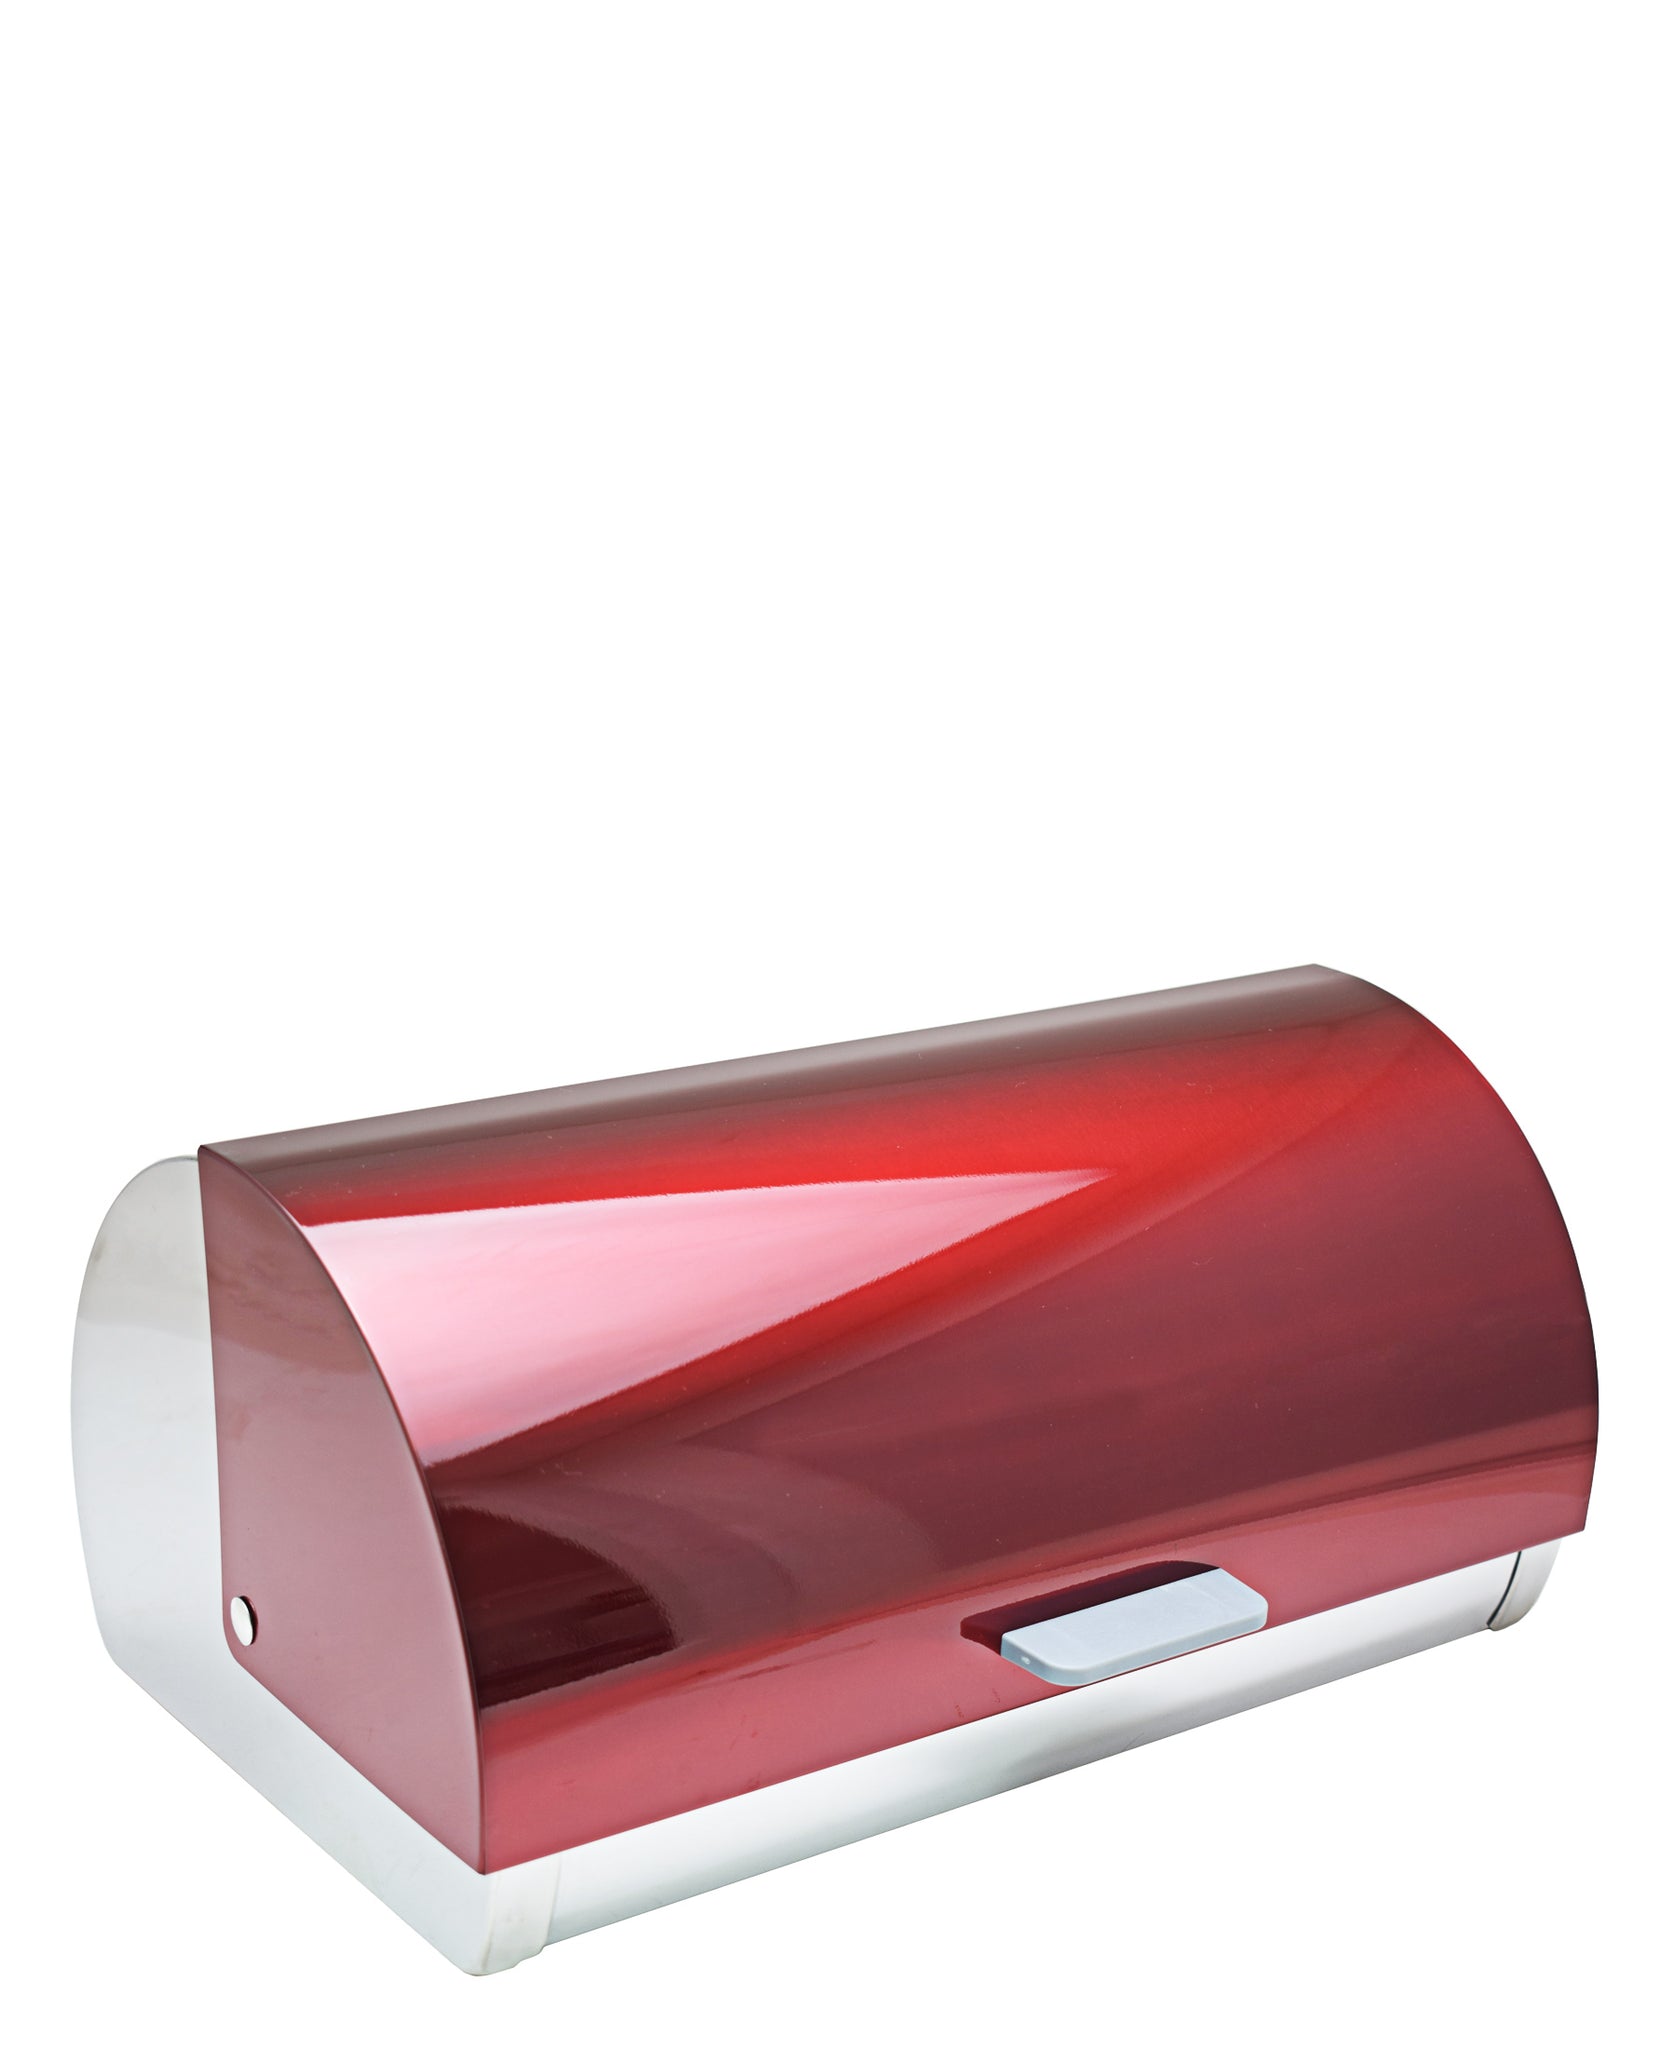 CTH Stainless Steel Bread Bin - Red